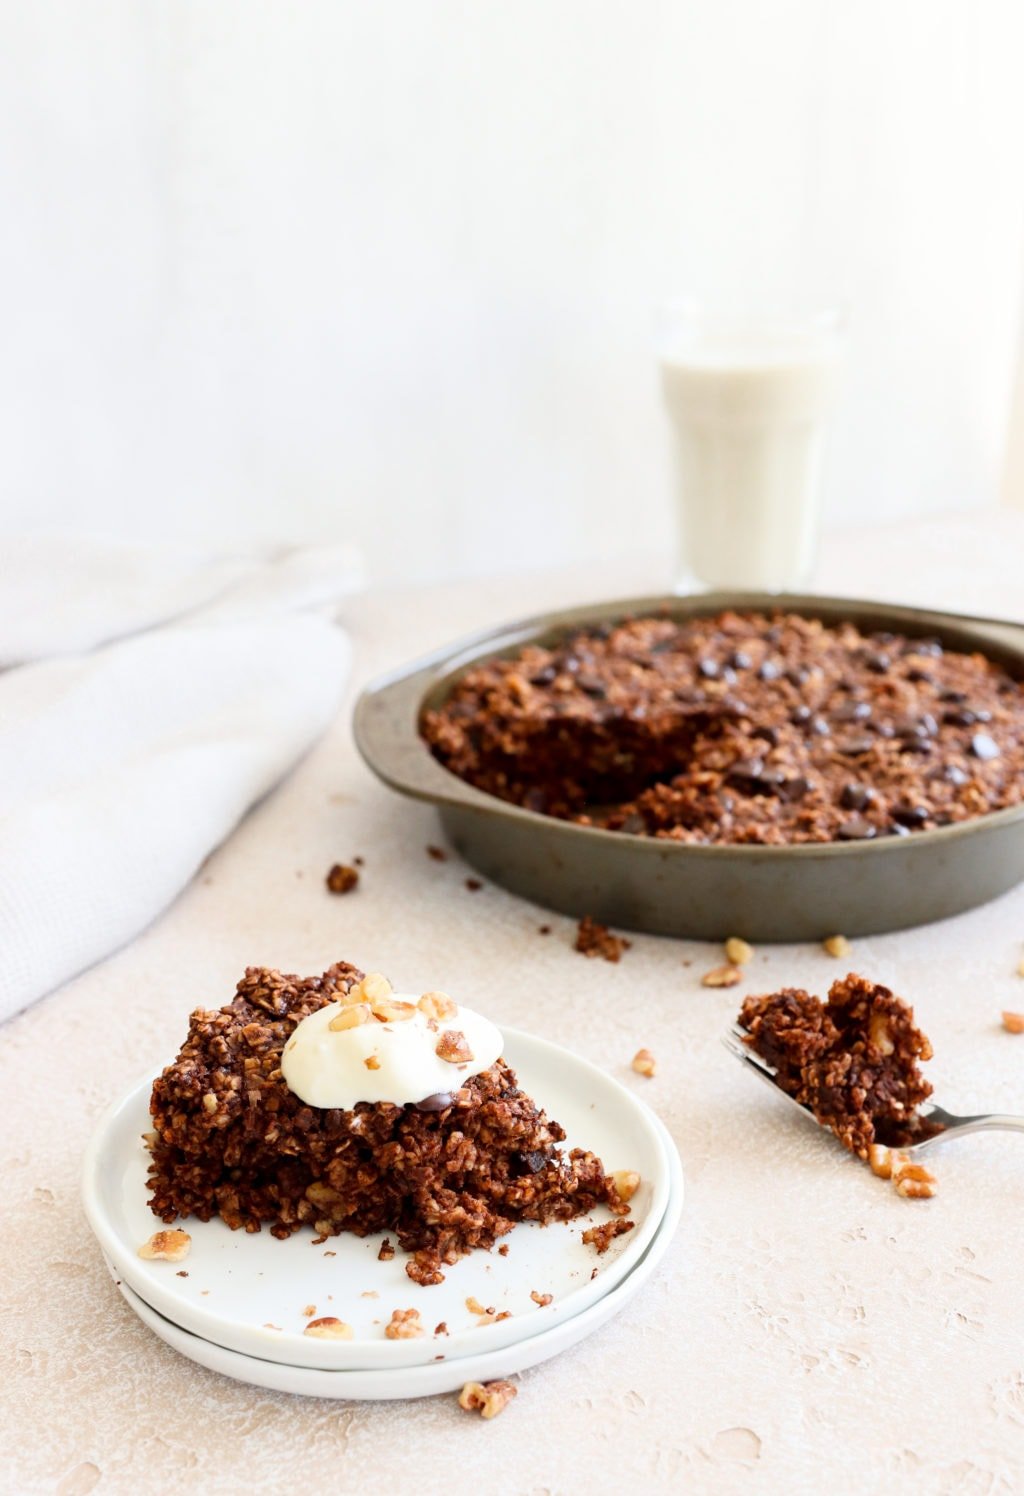 A slice of chocolate baked oatmeal on two white plates with the pan of chocolate baked oatmeal behind. Ingredients include: oats, banana, egg, coconut oil, maple syrup, cinnamon, prunes, walnuts.